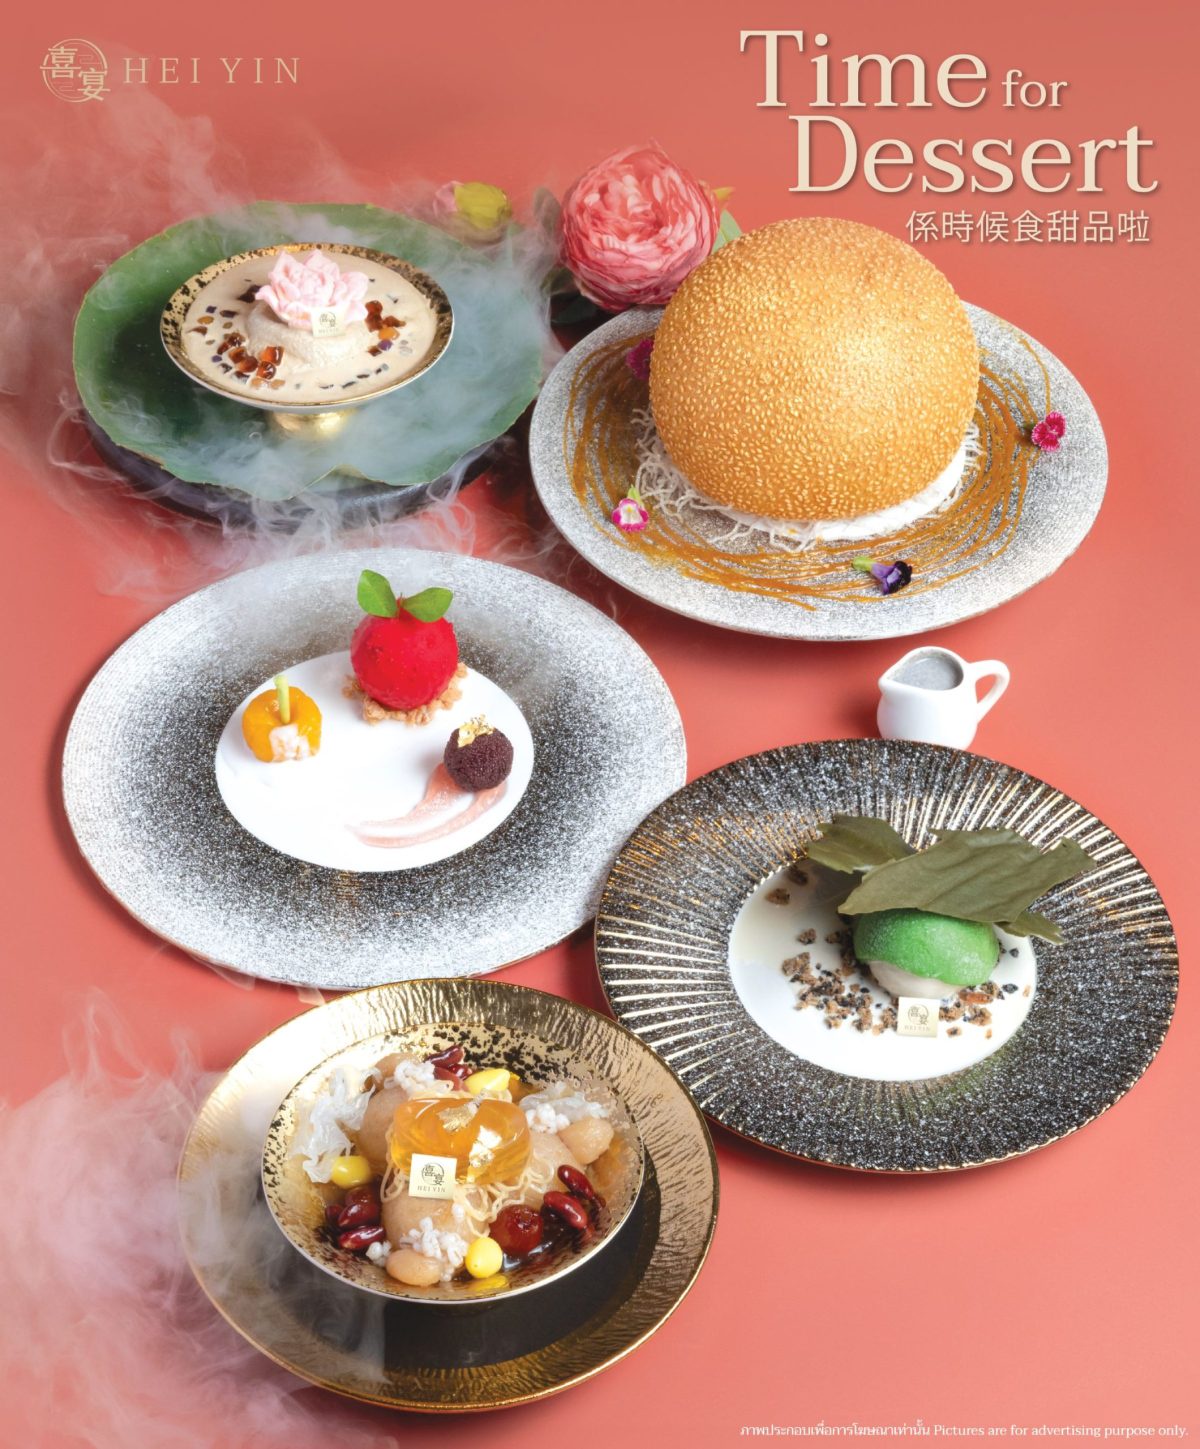 HEI YIN Cantonese restaurant introduces five new Cantonese-style desserts priced at 220 - 350 baht, available from today